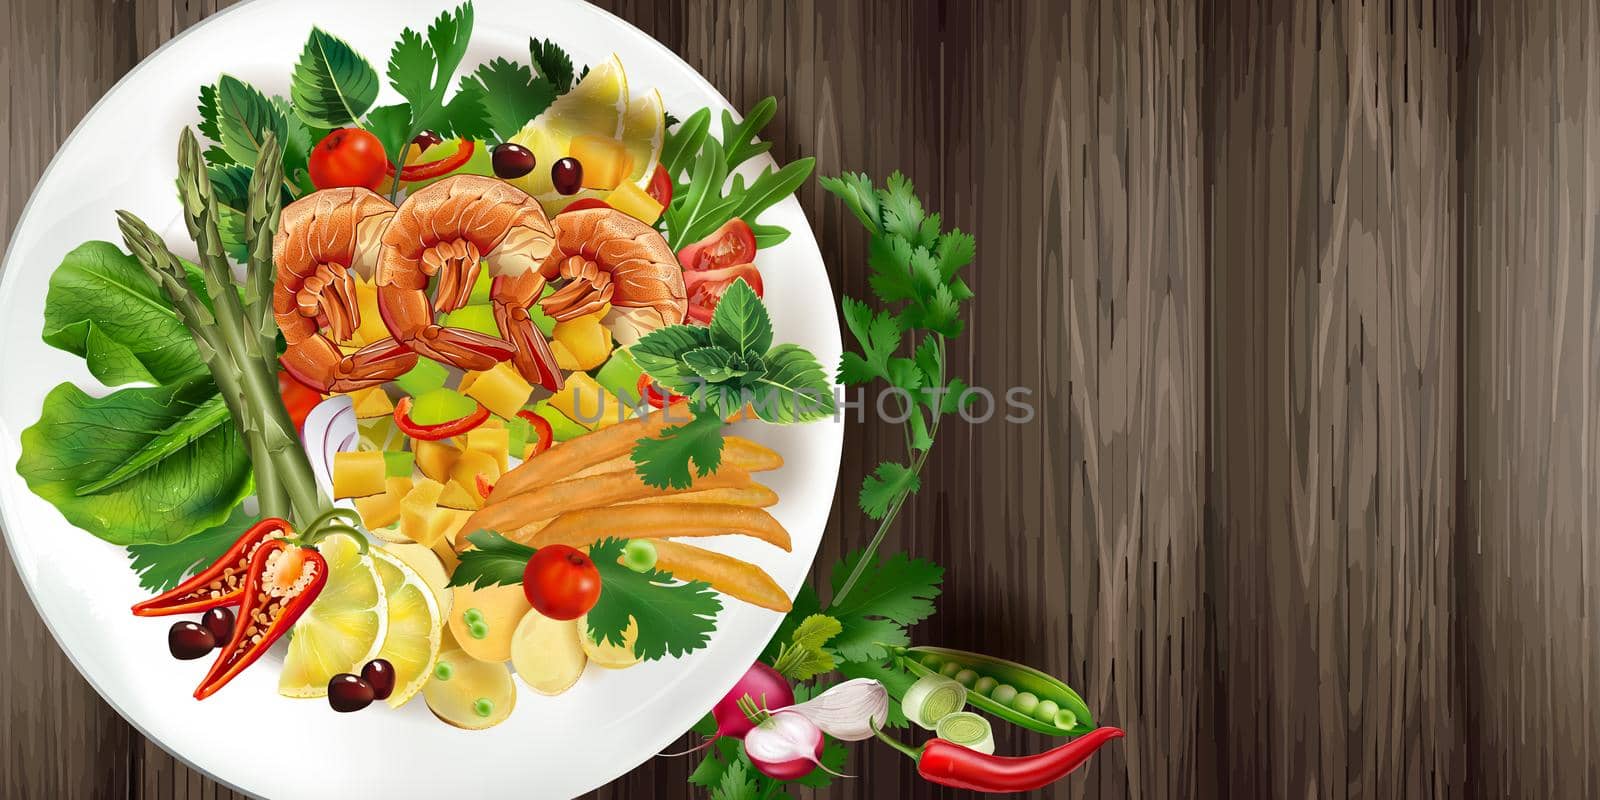 Mediterranean shrimp salad with vegetables and french fries. Realistic style illustration.